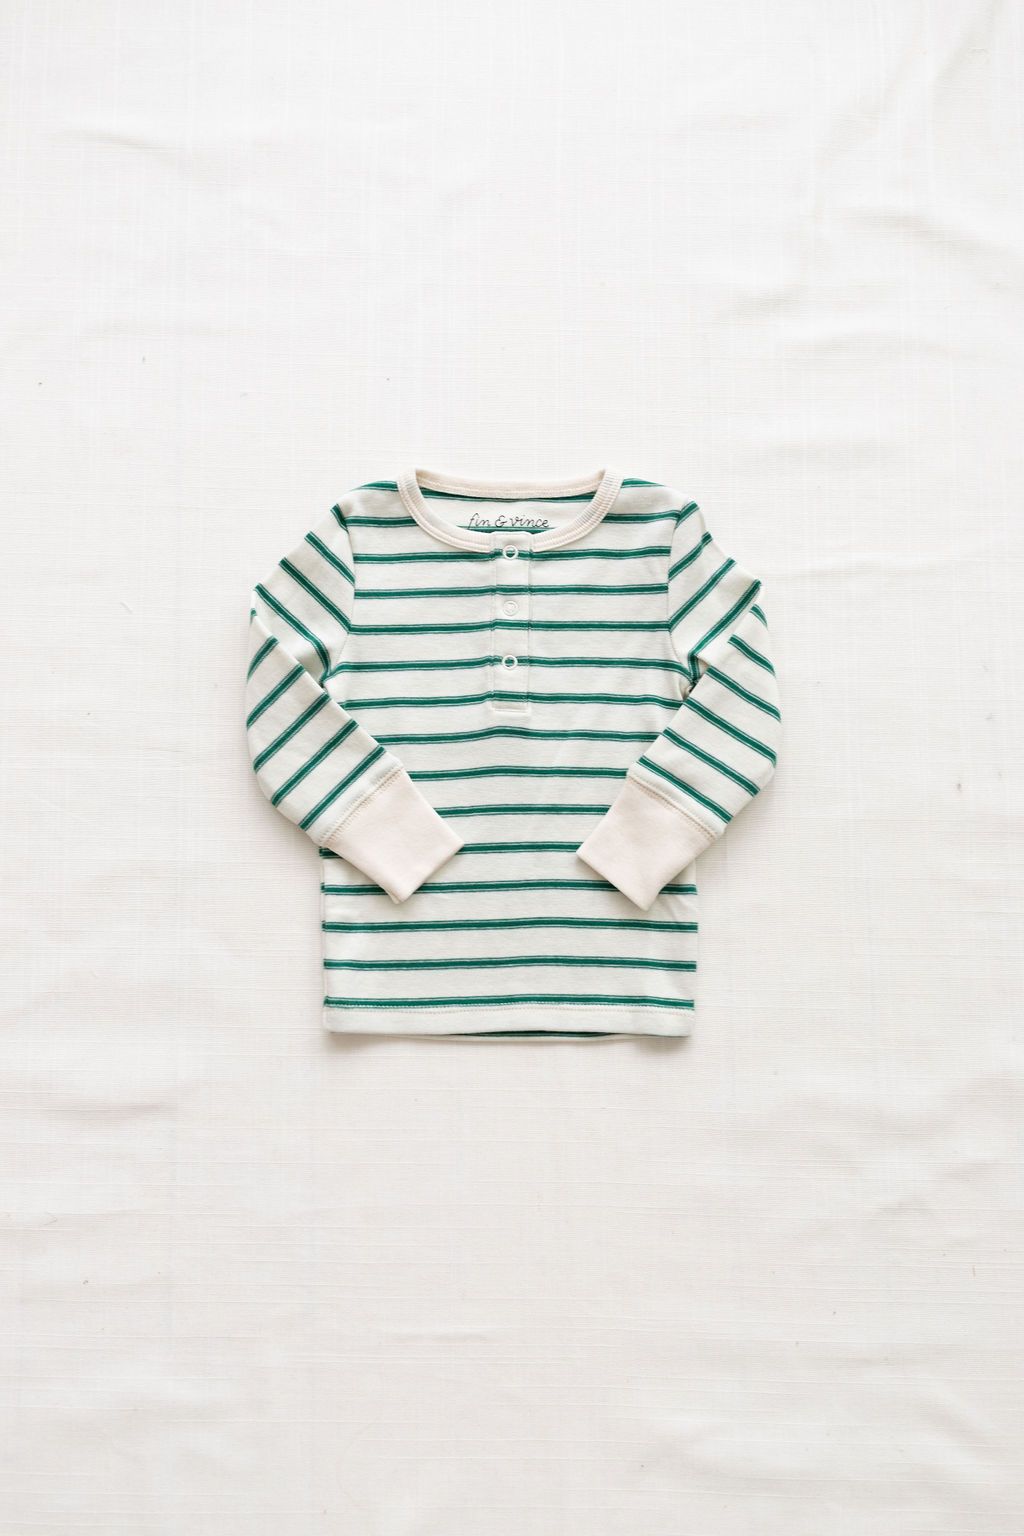 Fin & Vince Ribbed Snap Top, Ticking Stripe